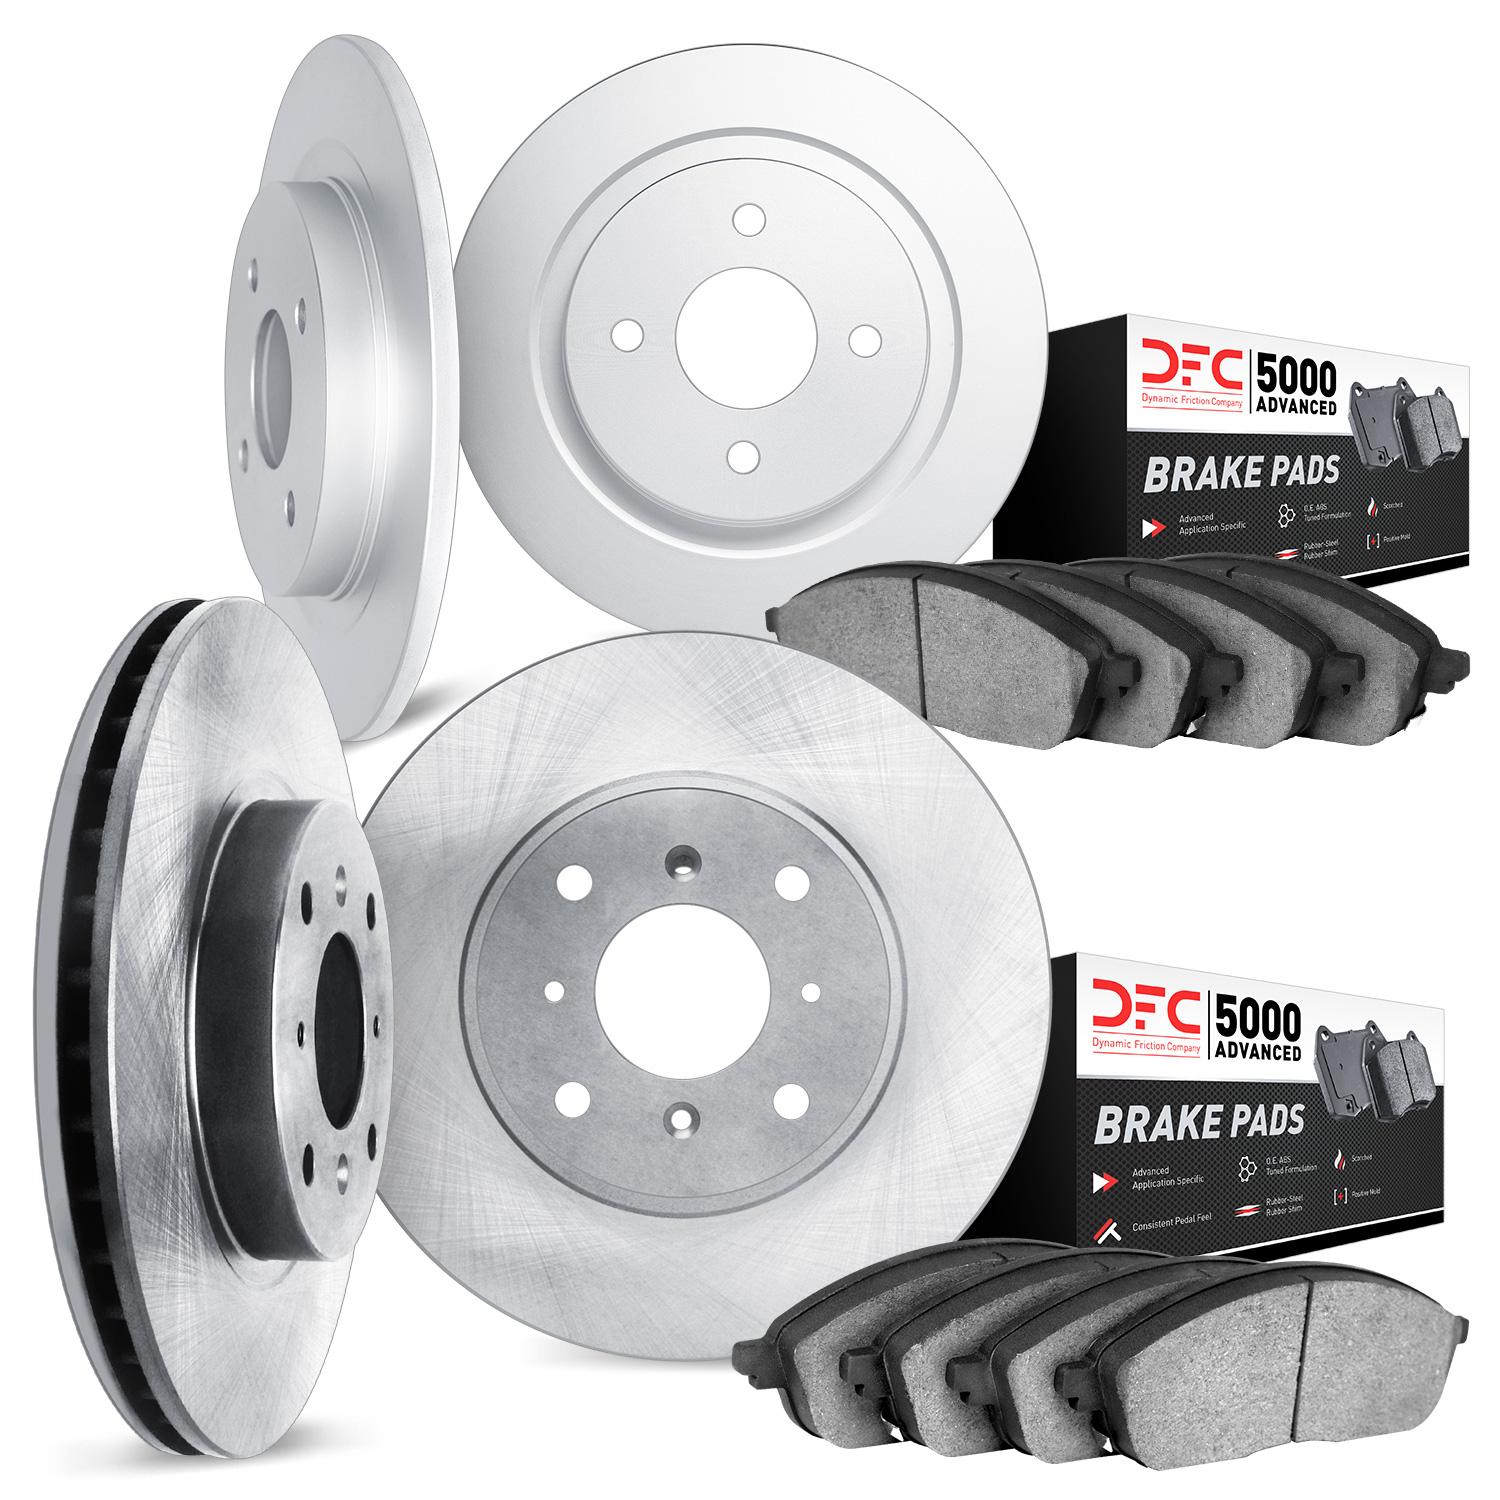 6504-72093 Brake Rotors w/5000 Advanced Brake Pads Kit, 1989-1990 Multiple Makes/Models, Position: Front and Rear